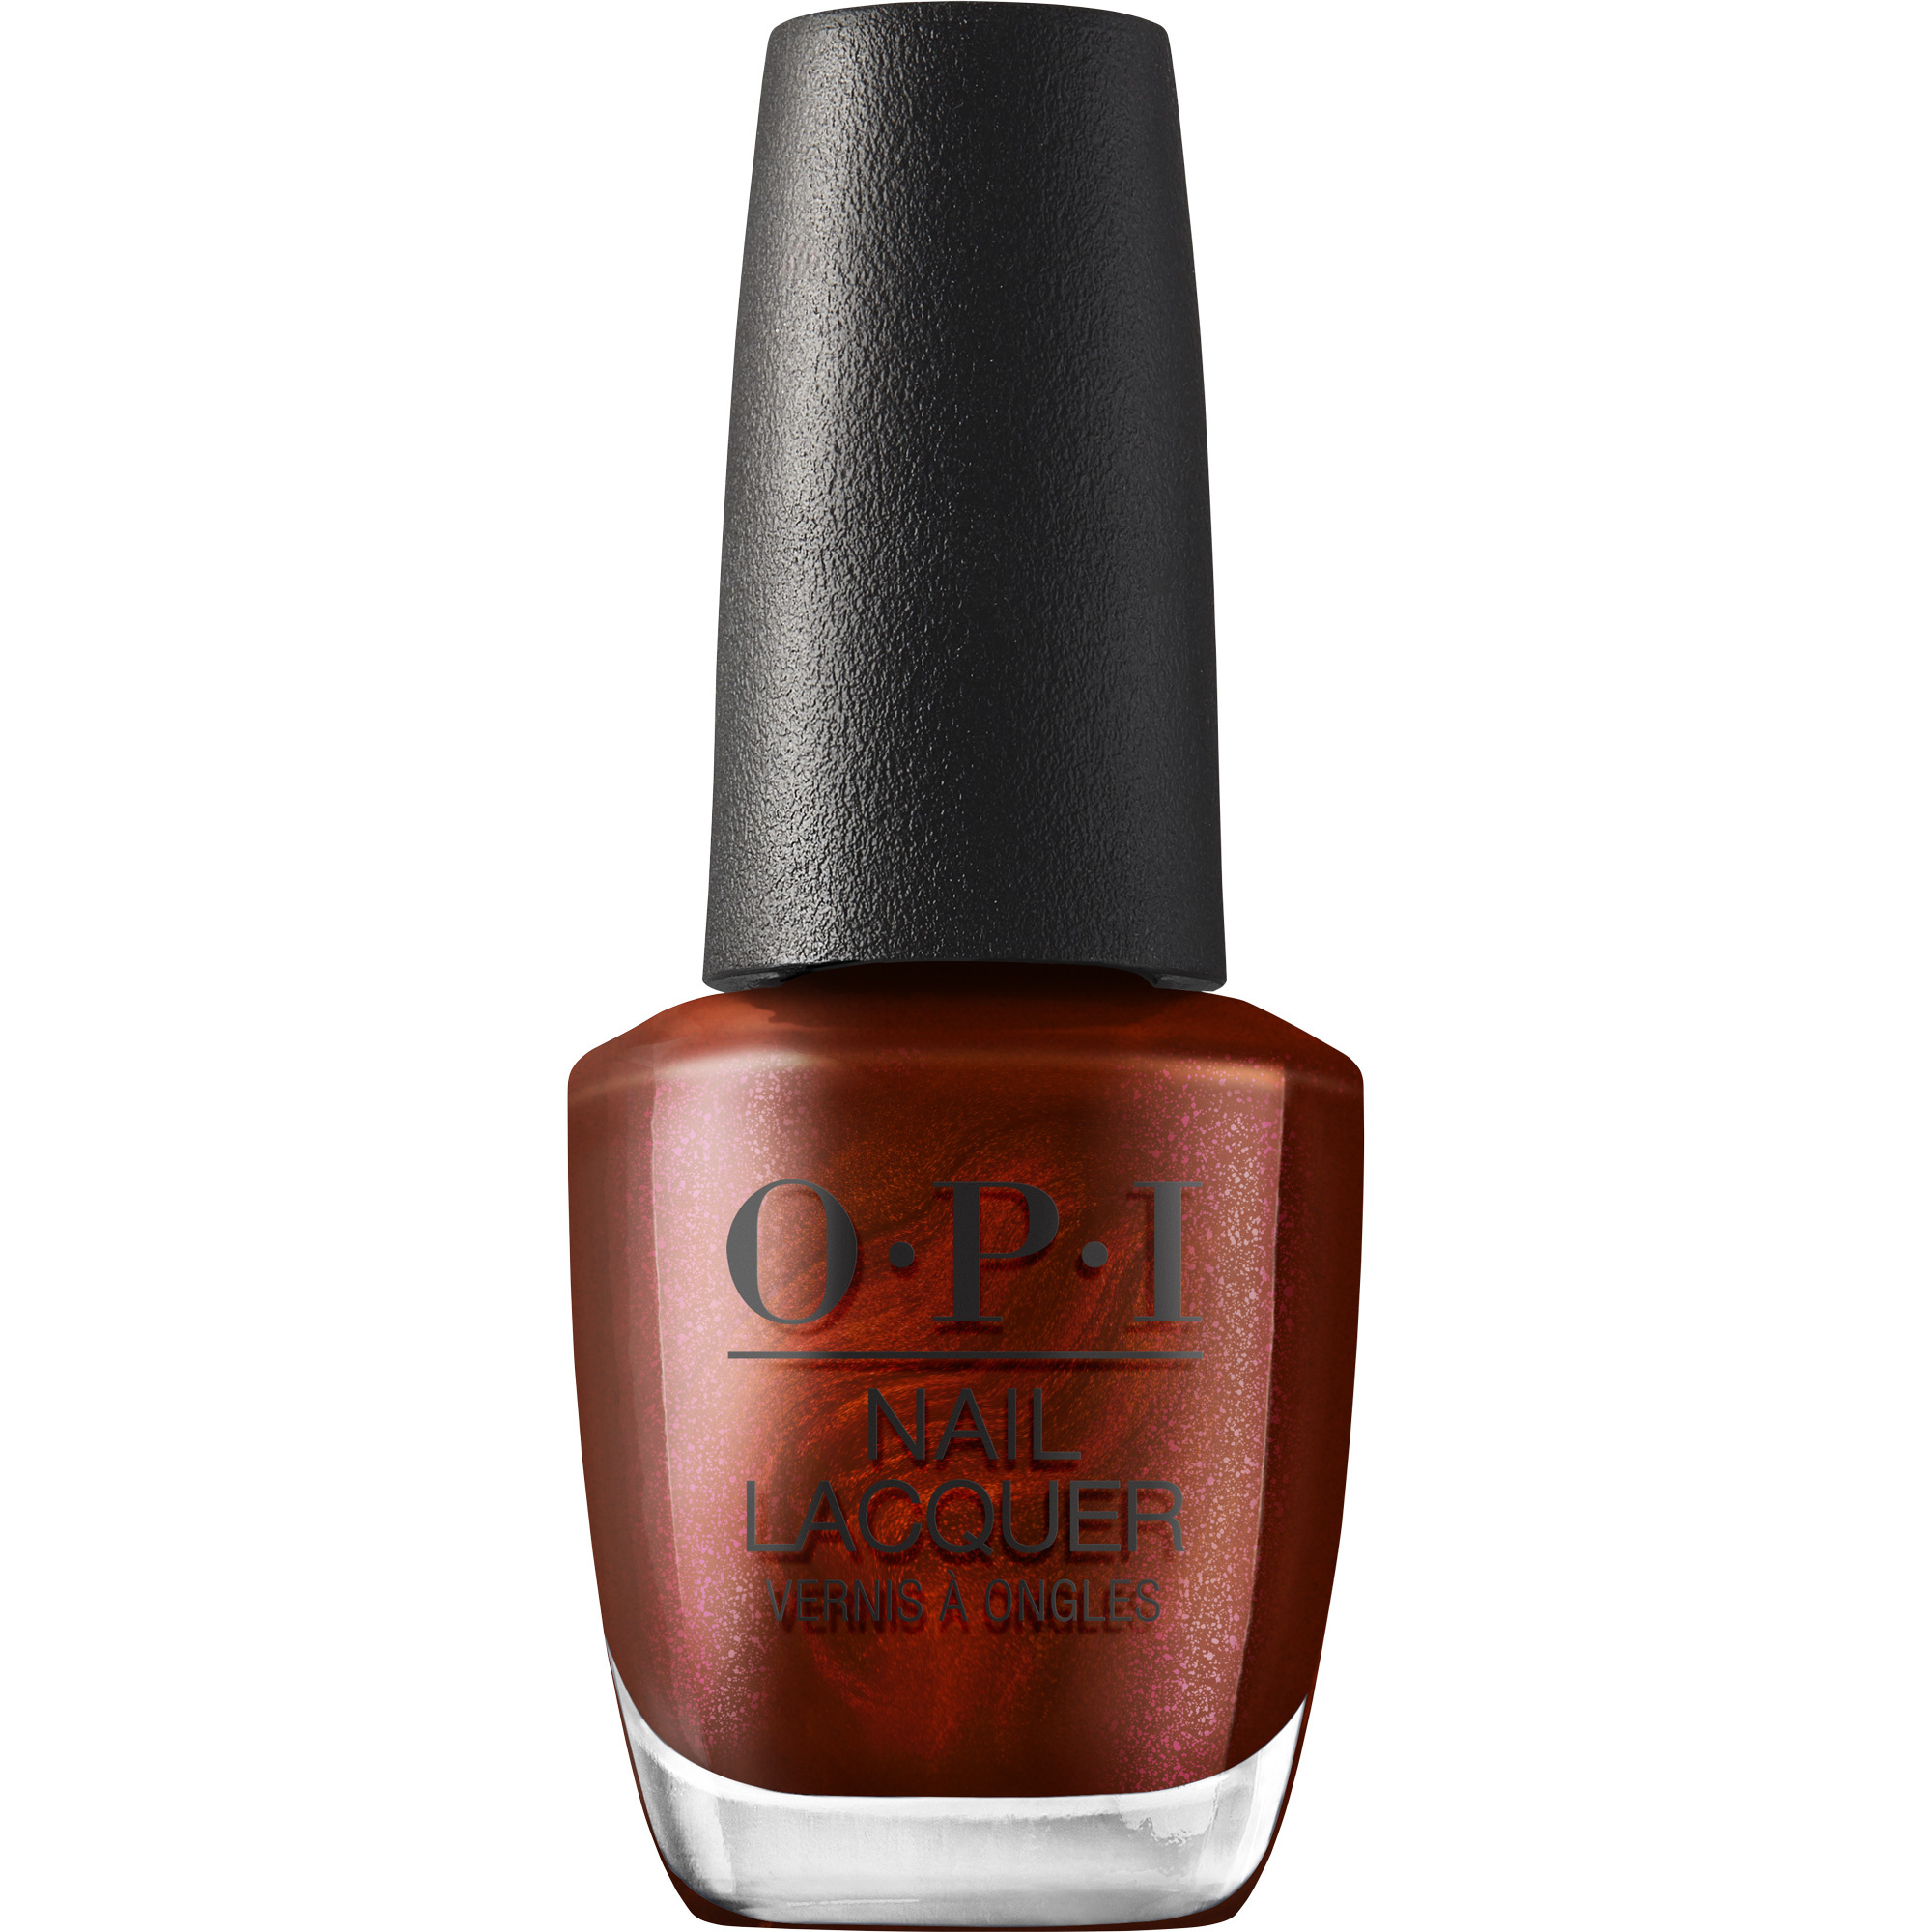 OPI Jewel Be Bold: Bring out the Big Gems